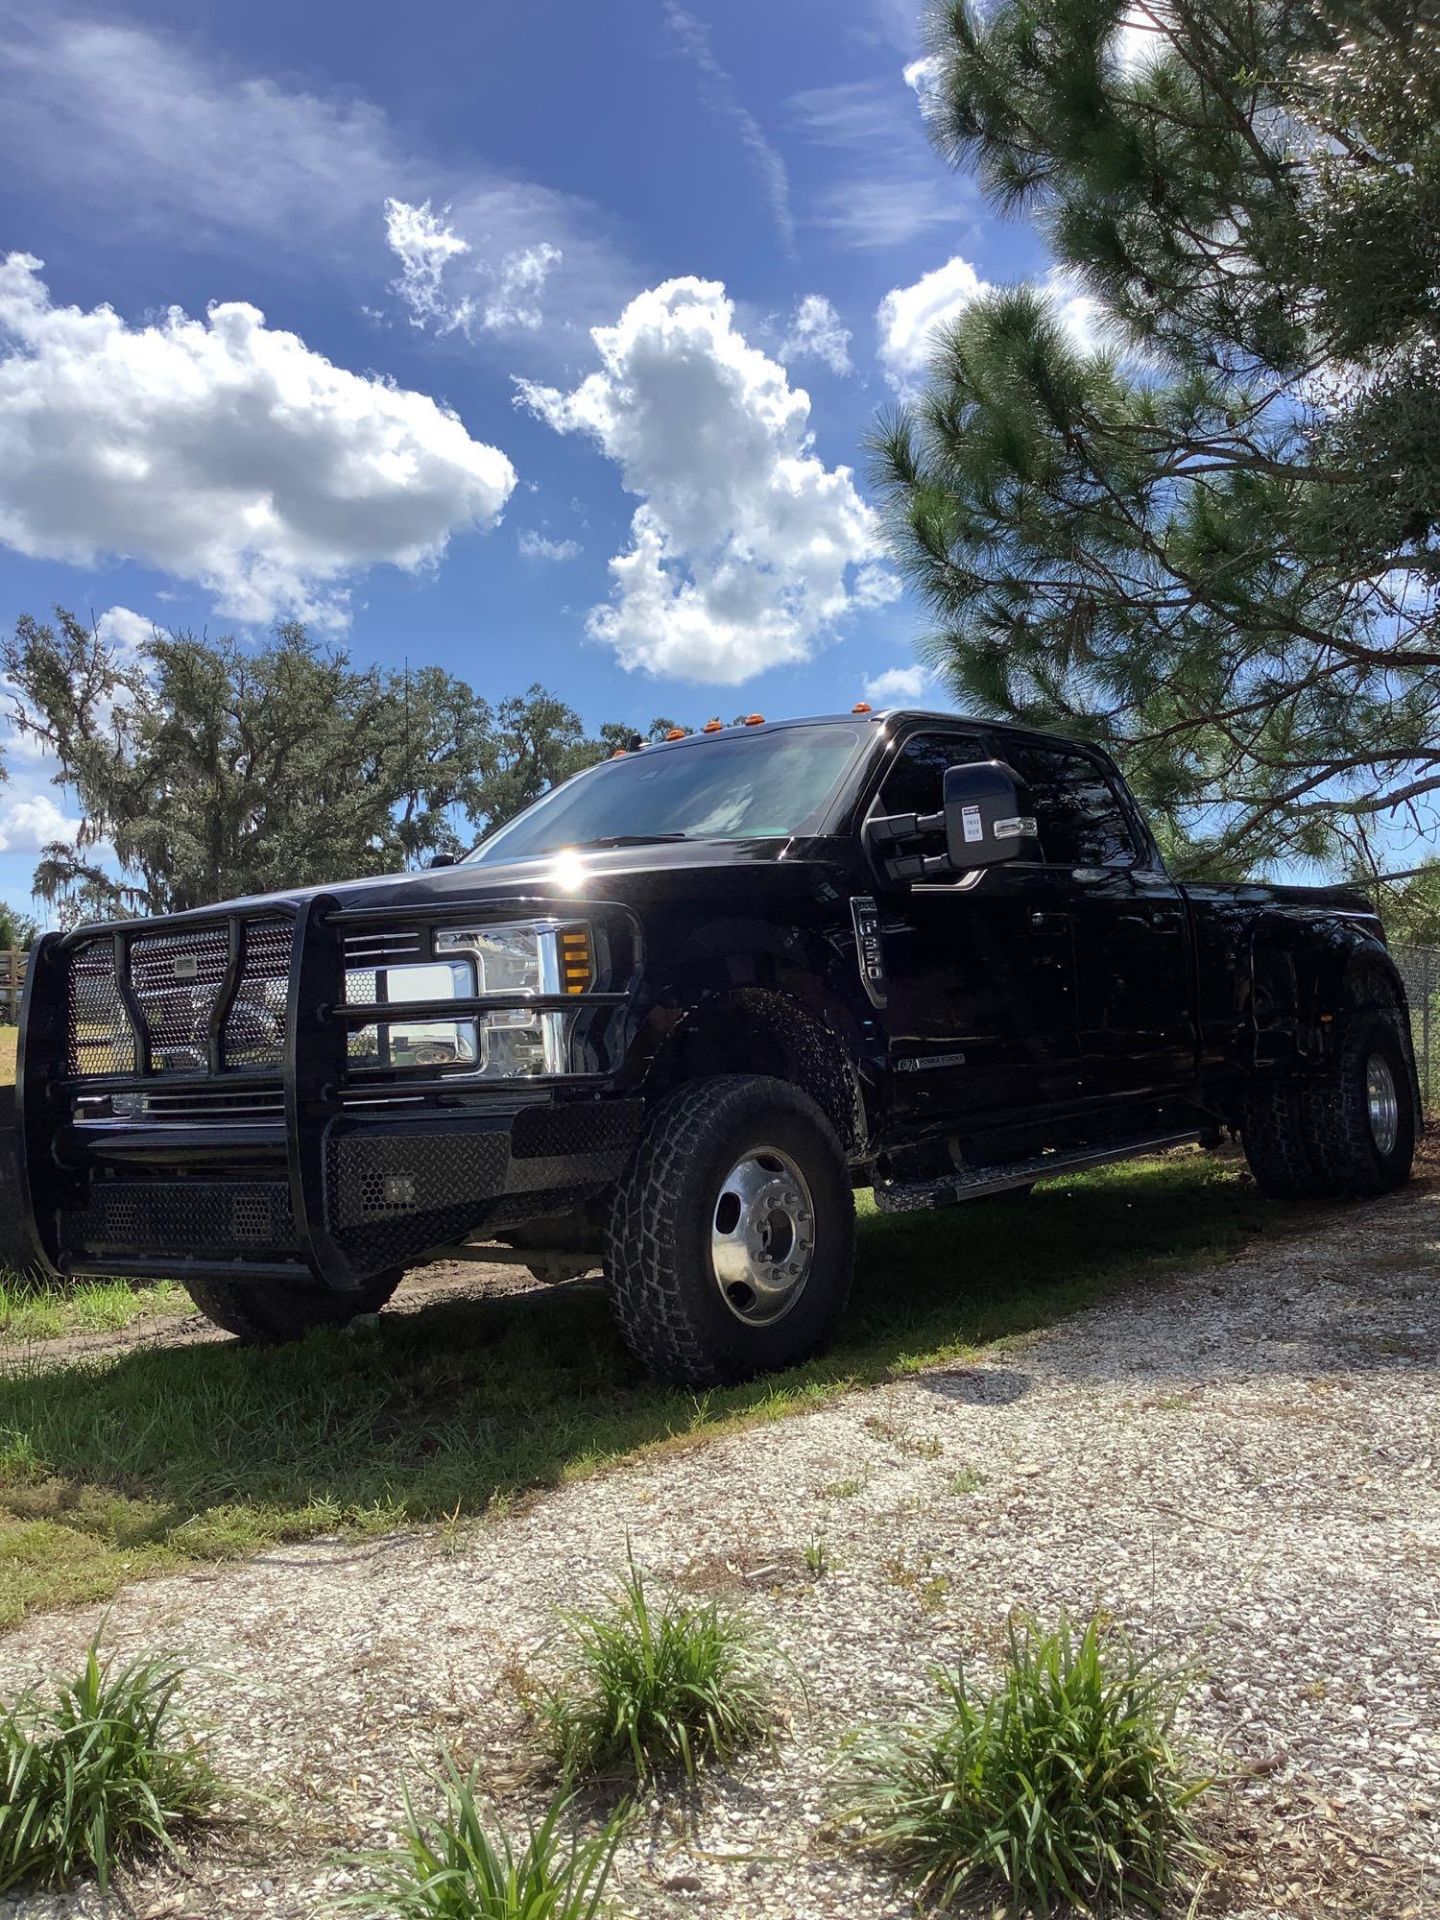 2019 FORD F-350 LARIAT CREW CAB LONG BED FX4 OFF ROAD SUPER DUTY POWER STROKE , TURBO DIESEL, AUTOMA - Image 2 of 11